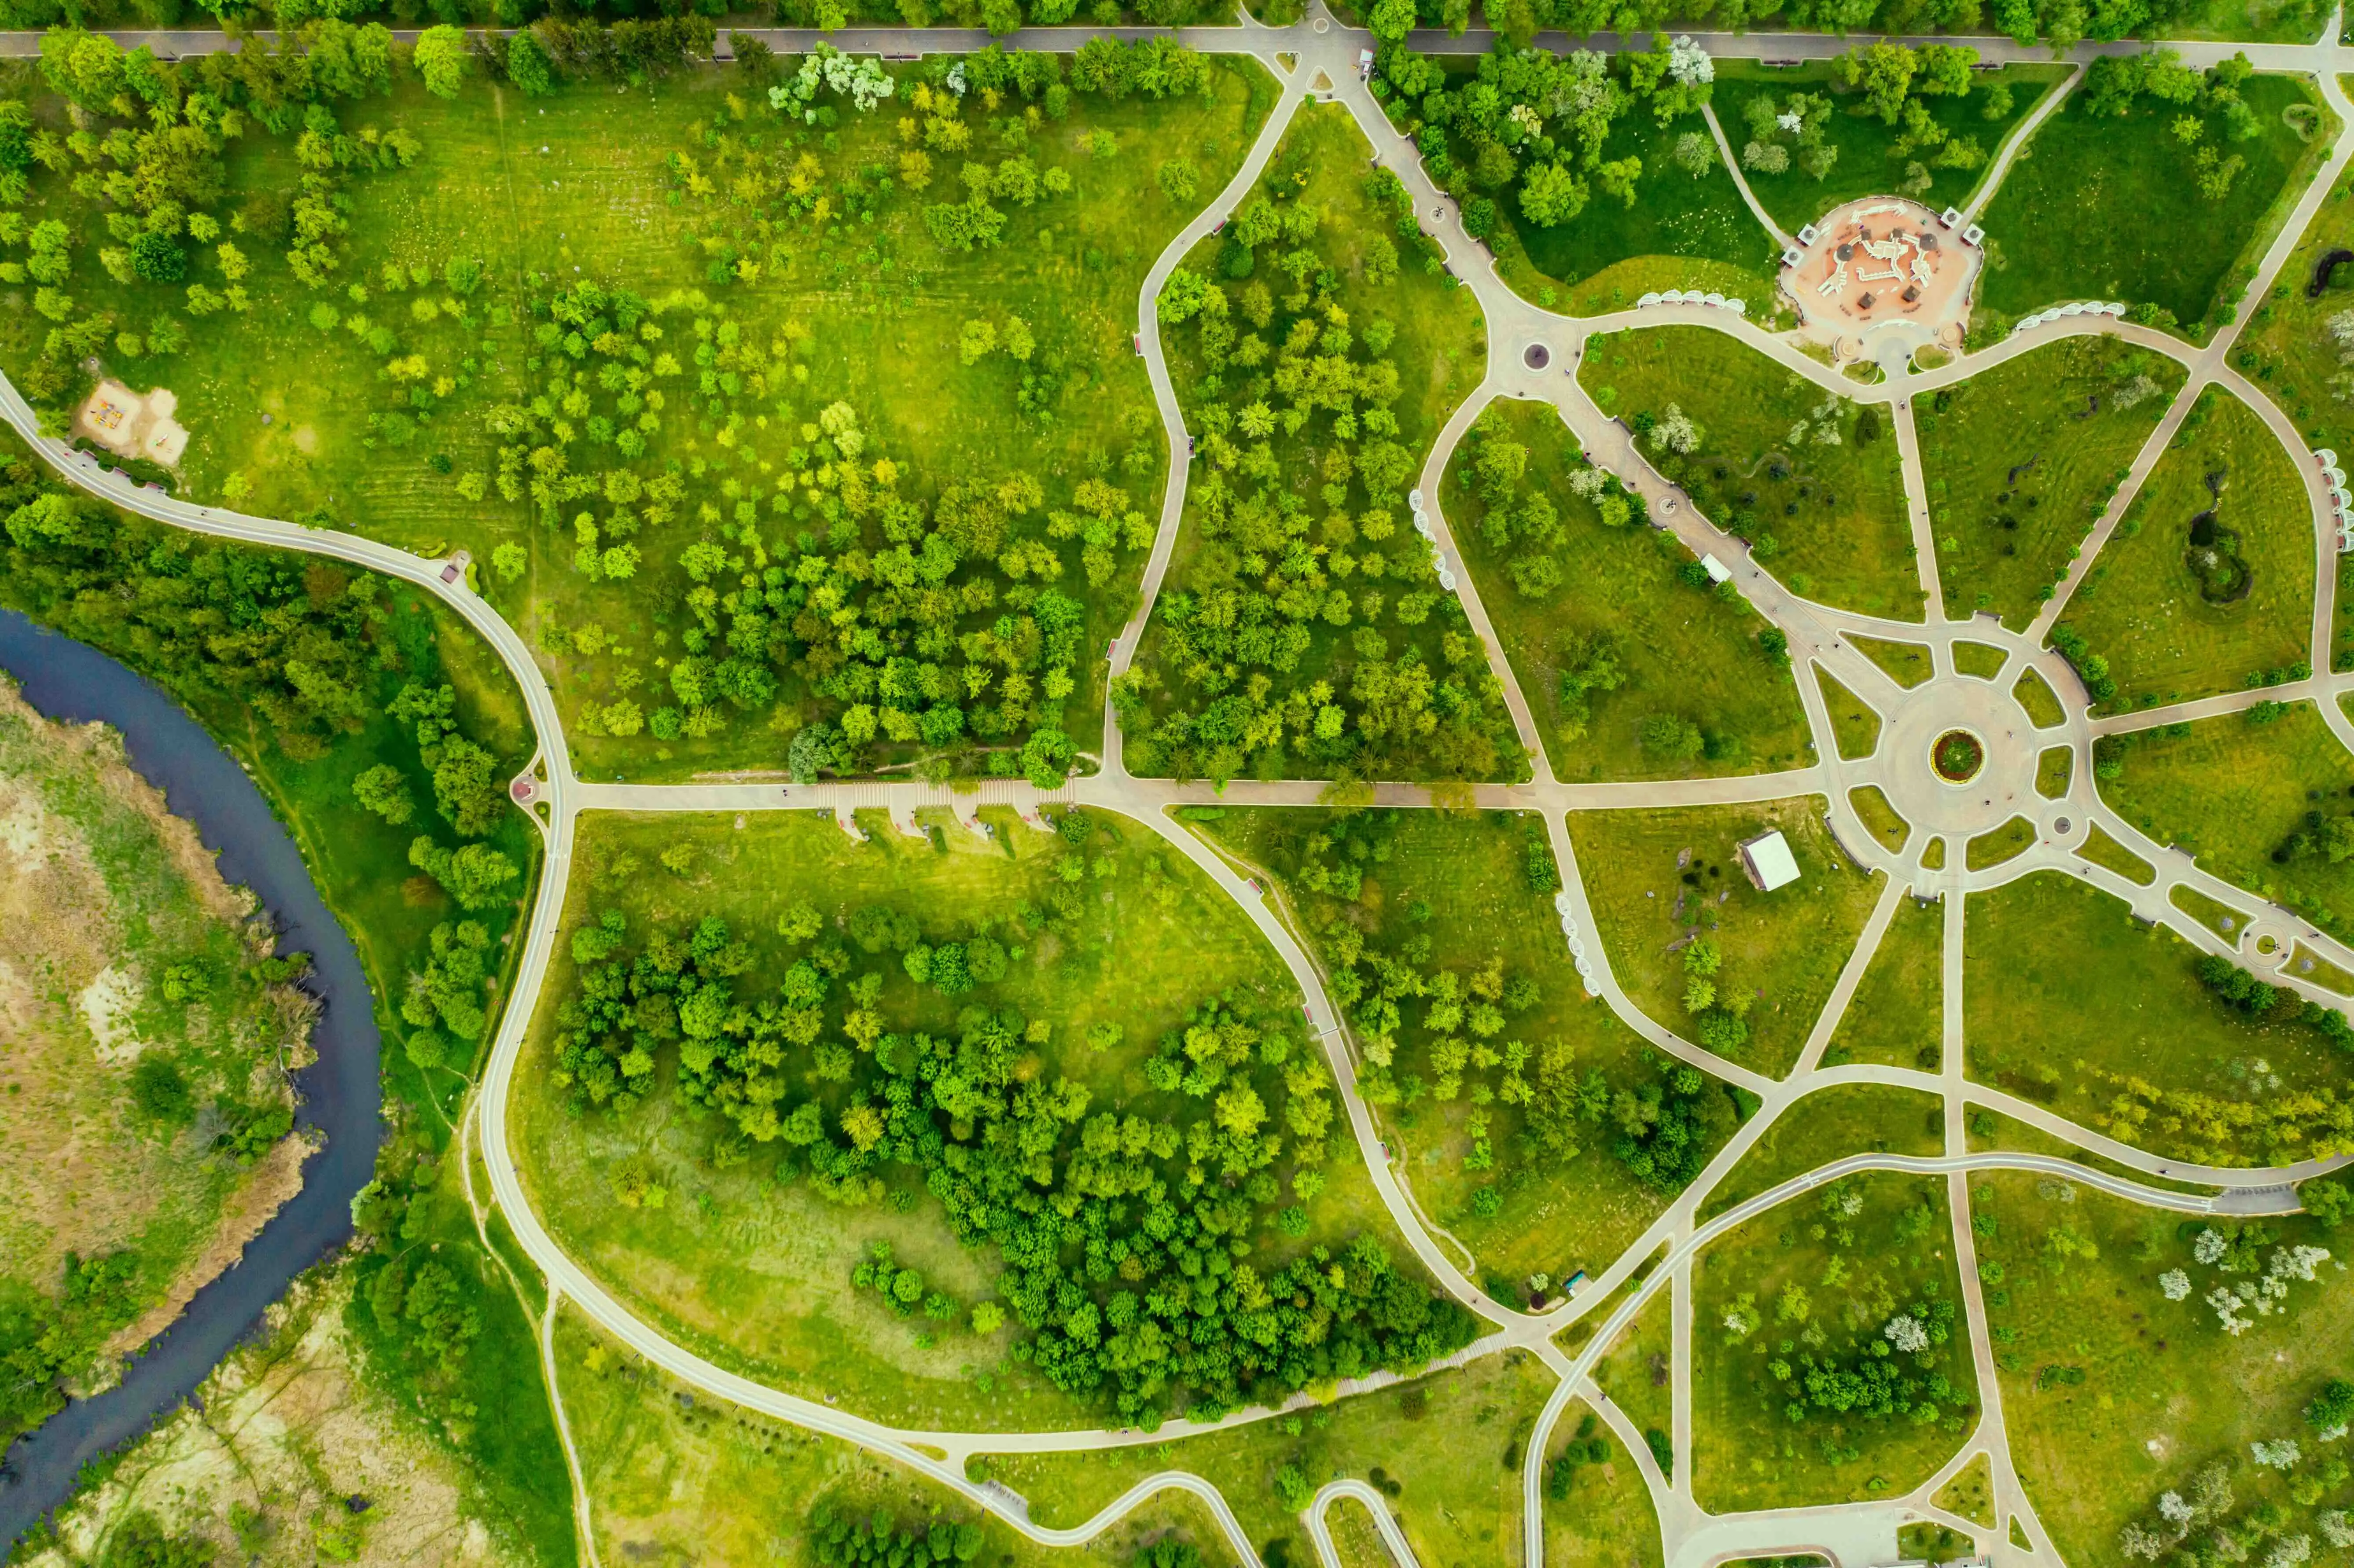 An overhead view of a park with many walking paths converging